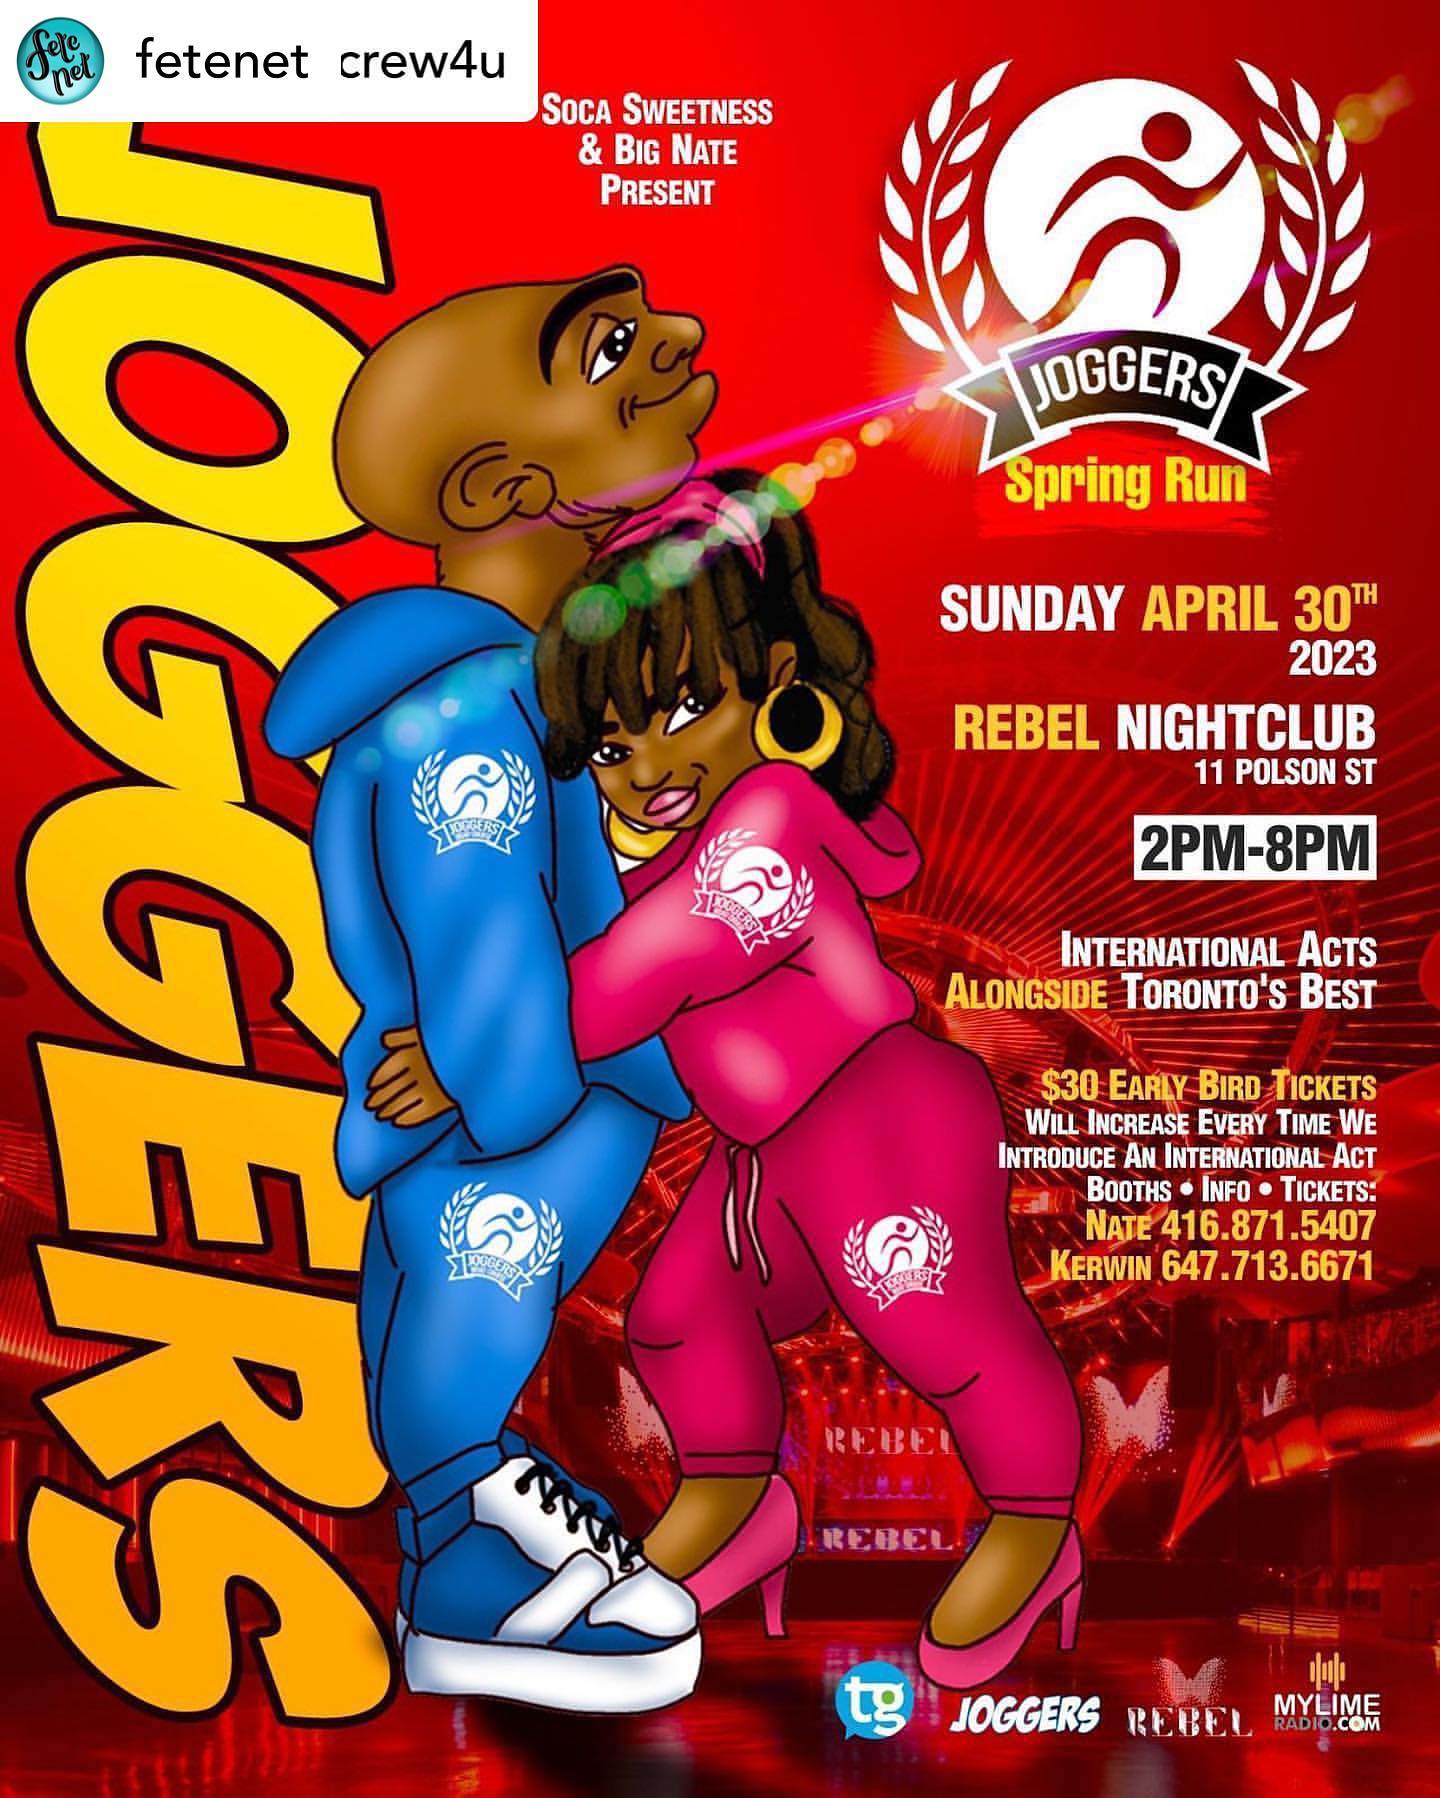 JOGGERS - We Conquered The Boats, We Conquered The Grounds - With Great Pleasure We Announce JOGGERS 2023 Spring Run @ REBEL NIGHTCLUB. International Acts Alongside Canada's Best msg For Tickets
Dynamic crew @416.906.8809

Attention everyone purchasing
Joggers tickets 
Doh stick on your early bird 

tickets 🎟🎟🎟
For faster efficient service pls when sending etransfer (Emt ) dynamic crew  at MR4CUPMAN@HOTMAIL.COM
 (1) name of event
 (2) phone number and name to  contact  for tickets
 (3) address for delivery  if needed (4) how many tickets in comments